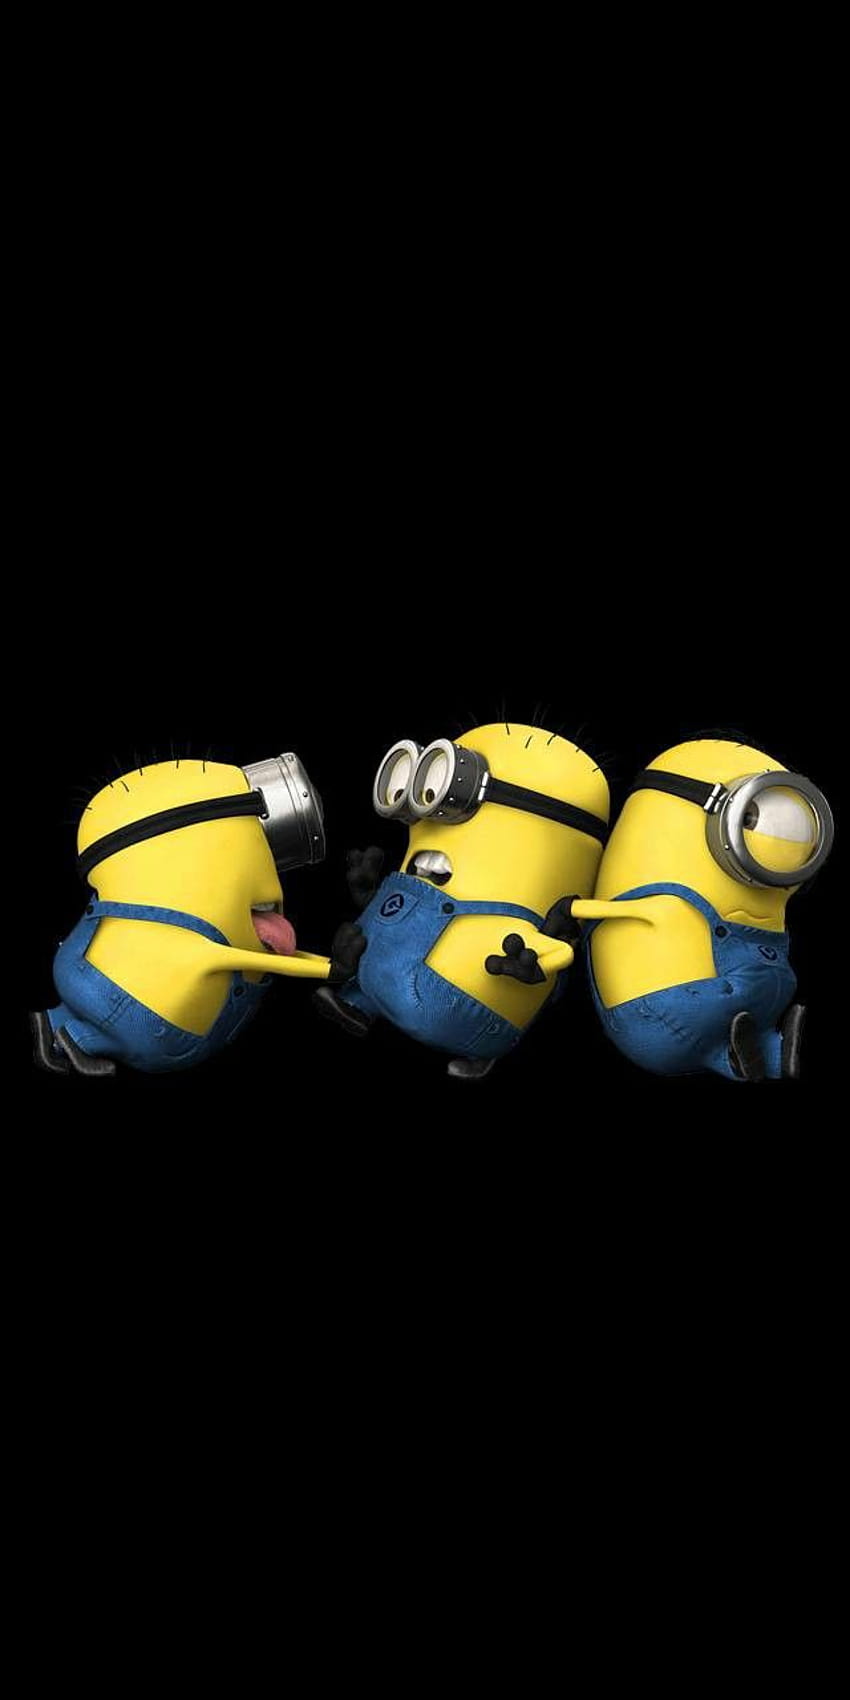 Download Bob On Kevin Despicable Me Minion Iphone Wallpaper | Wallpapers.com